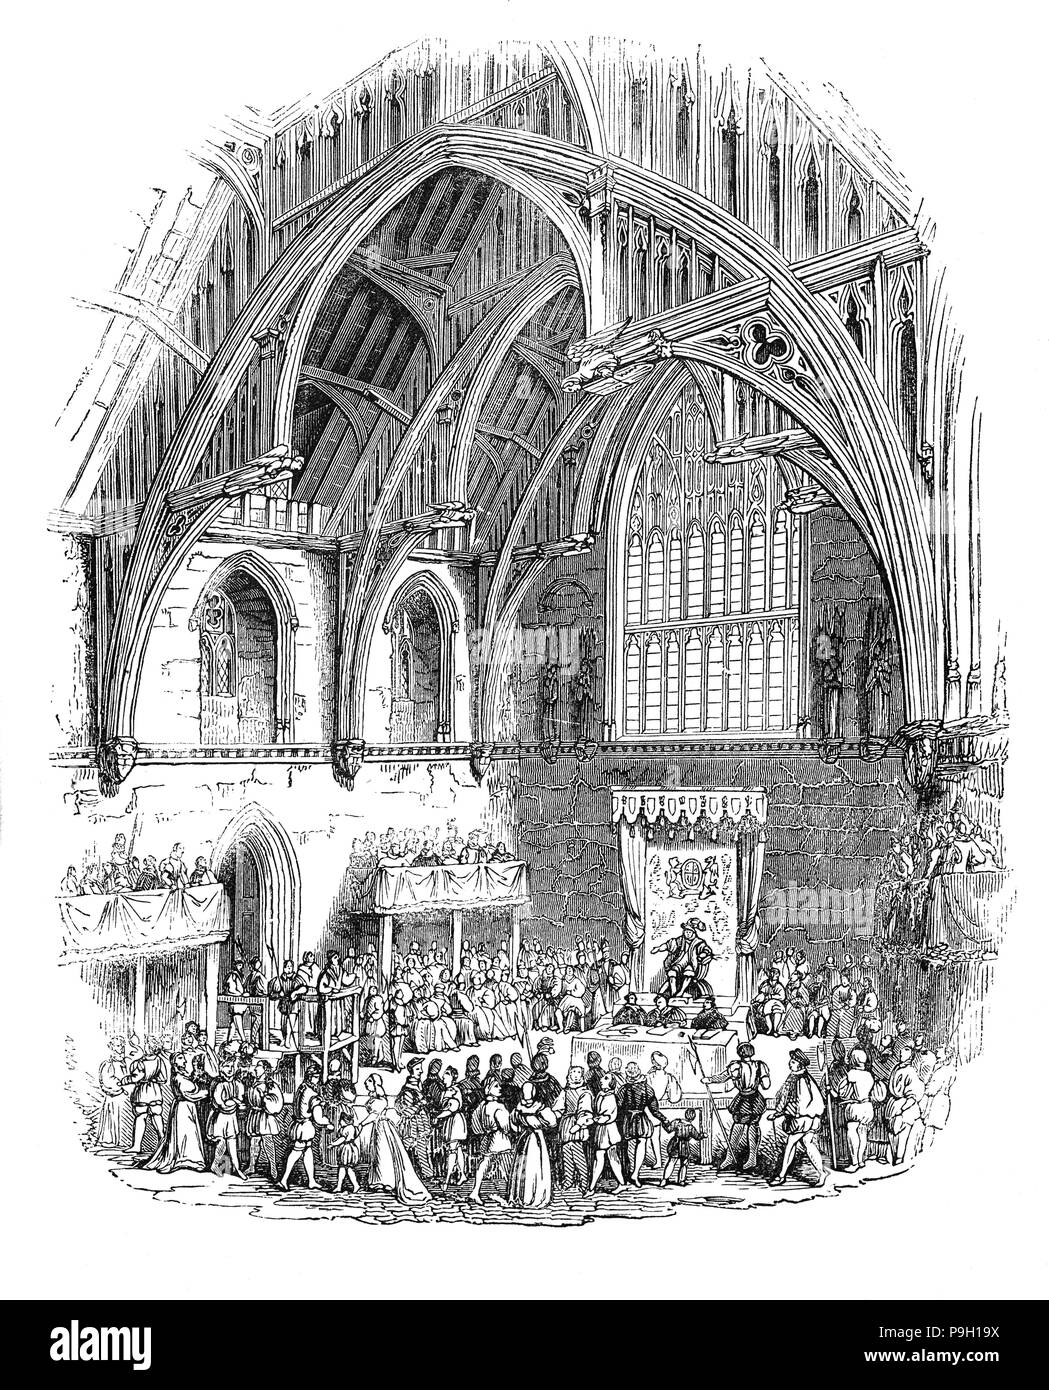 The trial of John Lambert (died 1538) an English Protestant martyr before King Henry VIII in Westminster Hall. He was educated at Queens' College, Cambridge, went to Antwerp and became a member of the group of humanist theologians that met at the White Horse Tavern. In 1536 after returning to England he was accused of heresy by the Duke of Norfolk, but escaped until 1538, when he was put on trial, and burned at the stake,  on 22 November 1538 at Smithfield, London. Stock Photo